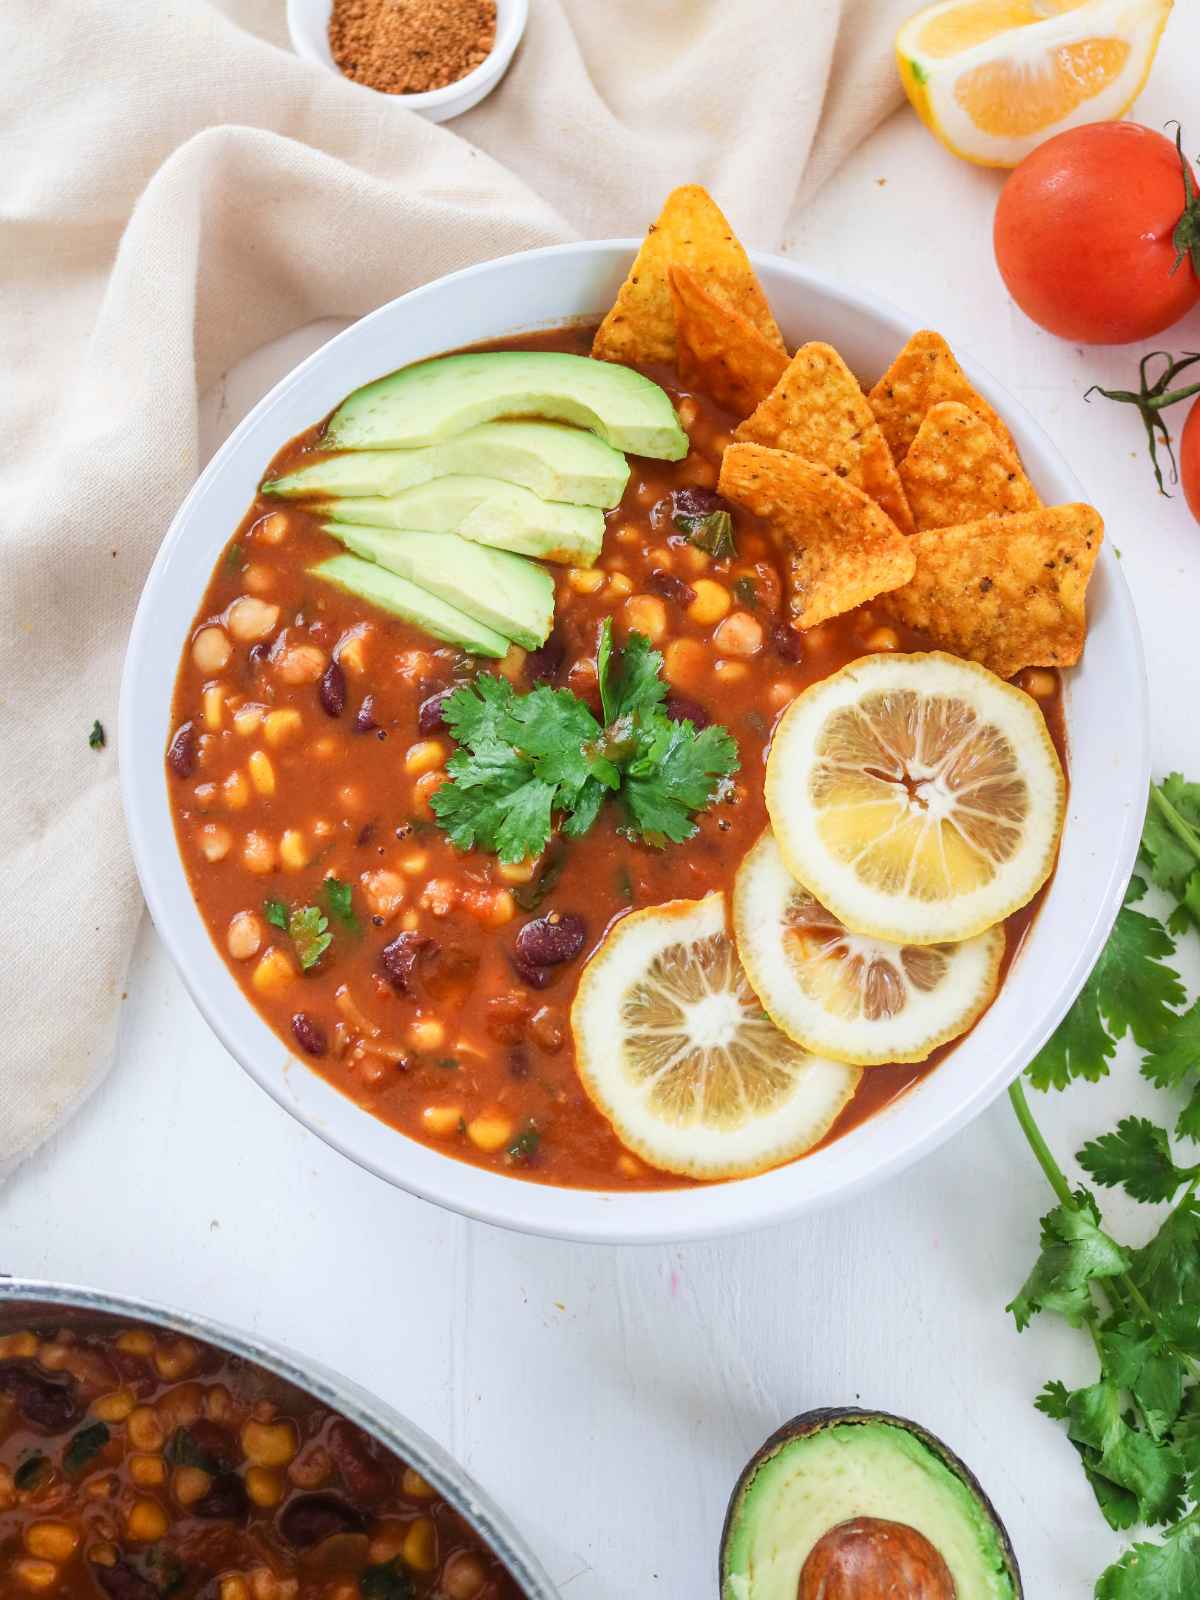 Taco Soup served in a white bowl garnished with avocado slices, cilantro leaves and lemon wedges.